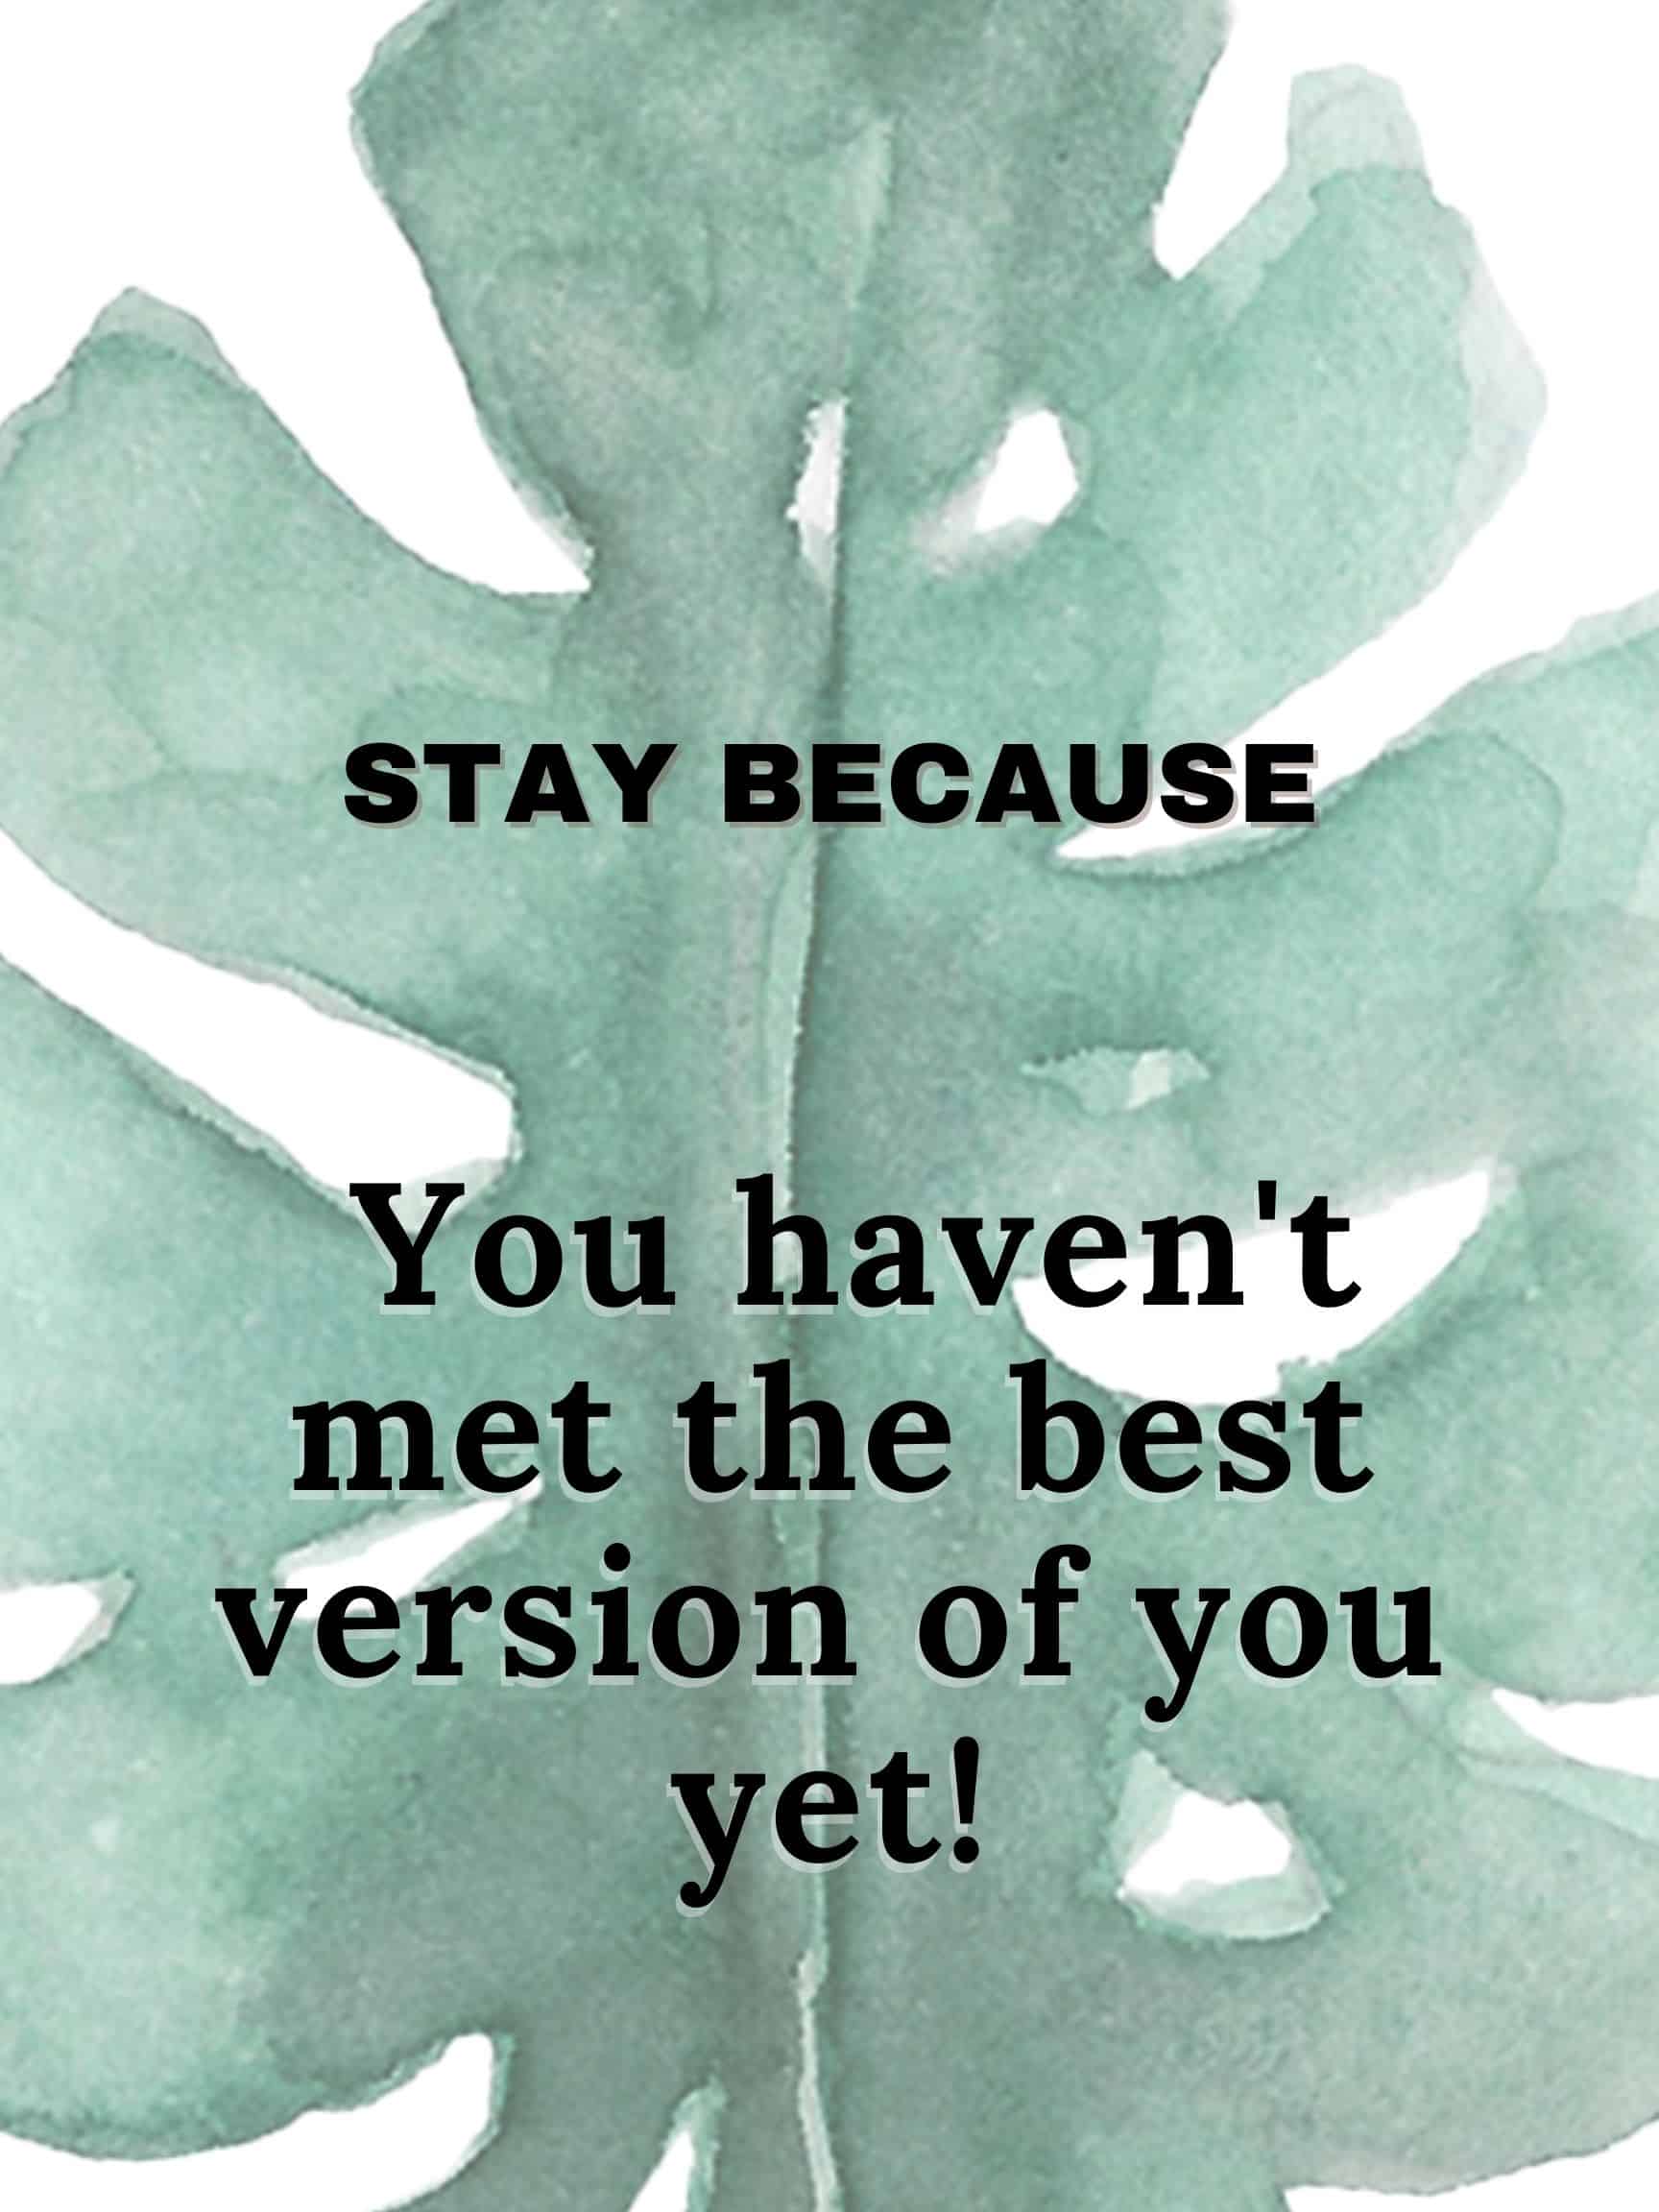 Stay because you haven't met the best version of you yet #StayBecause